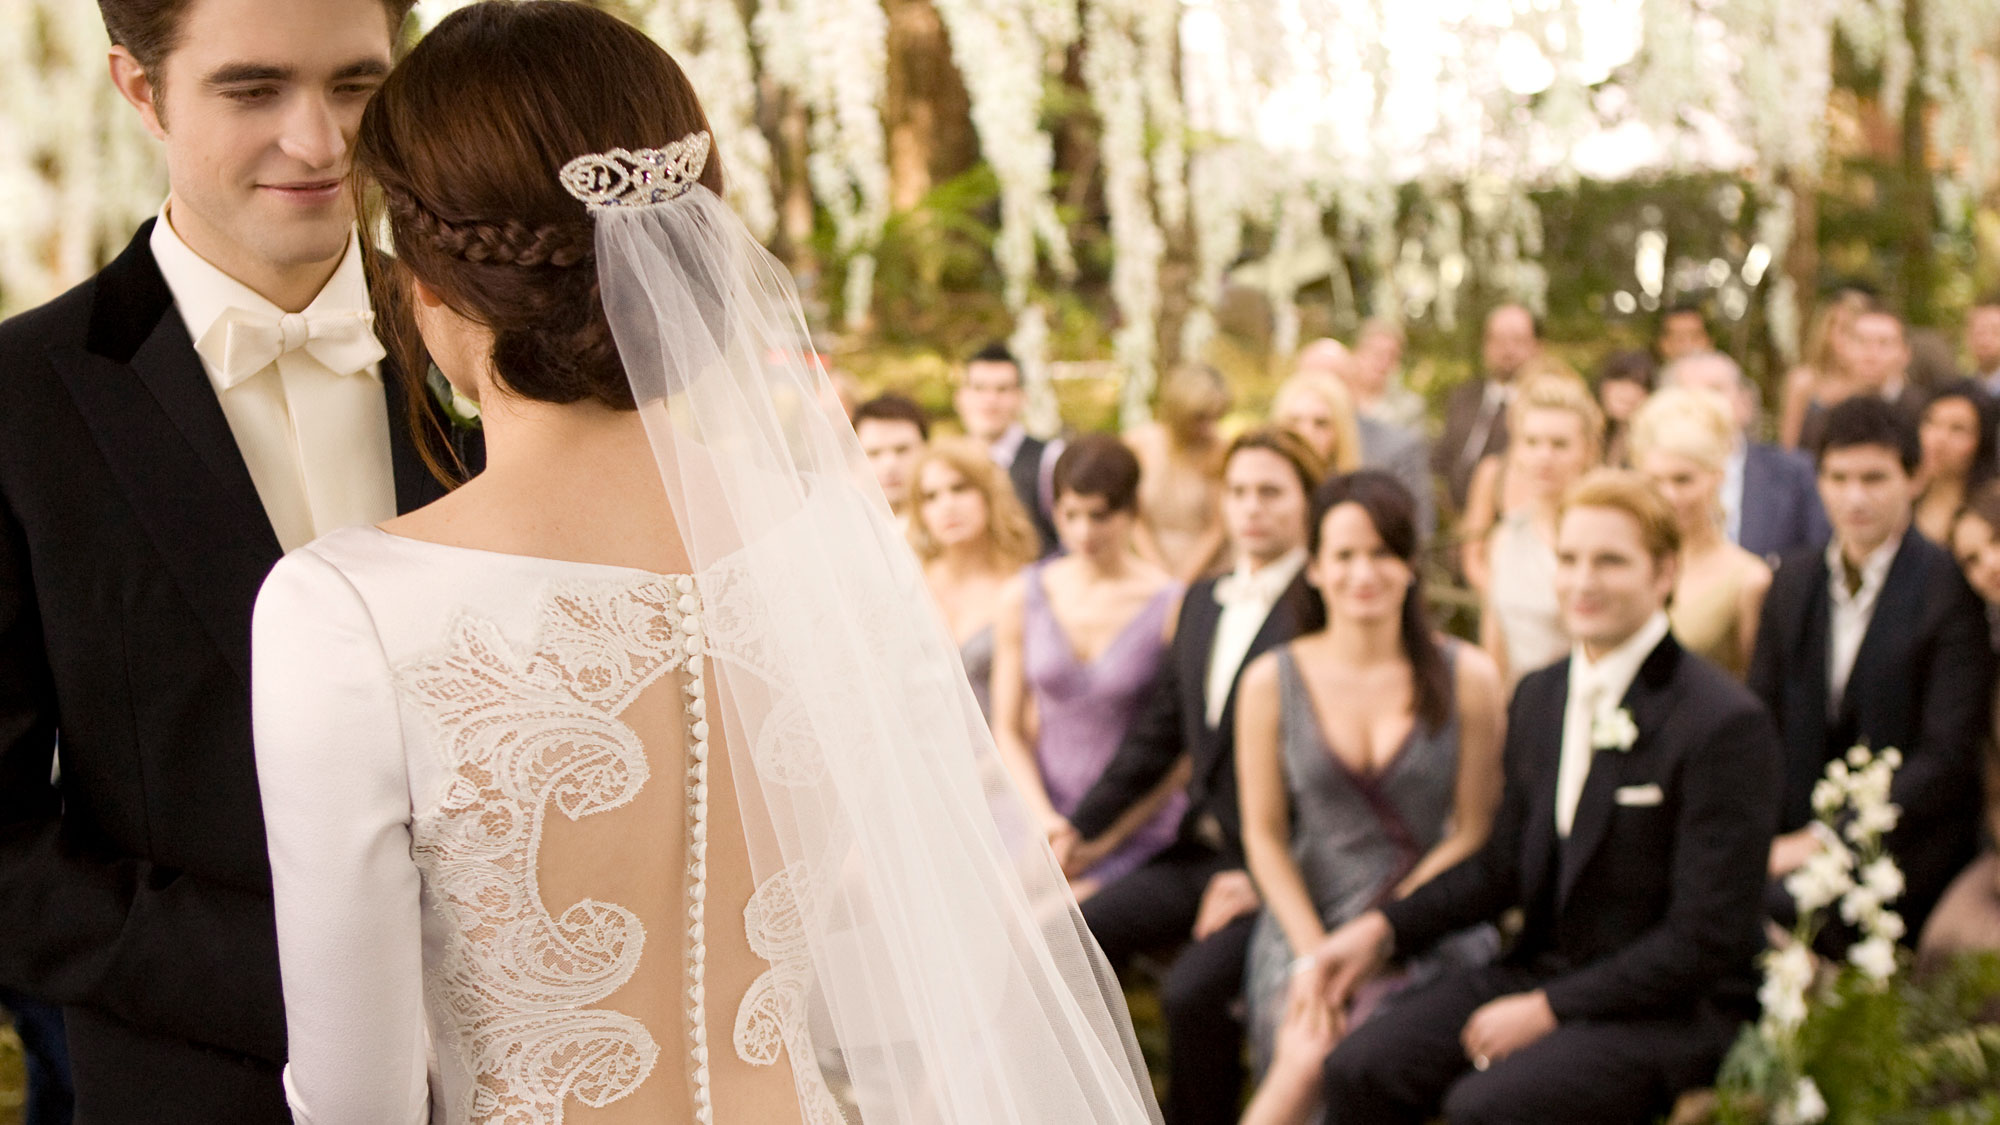 Bella Swan's Twilight Wedding Dress Is Up For Auction